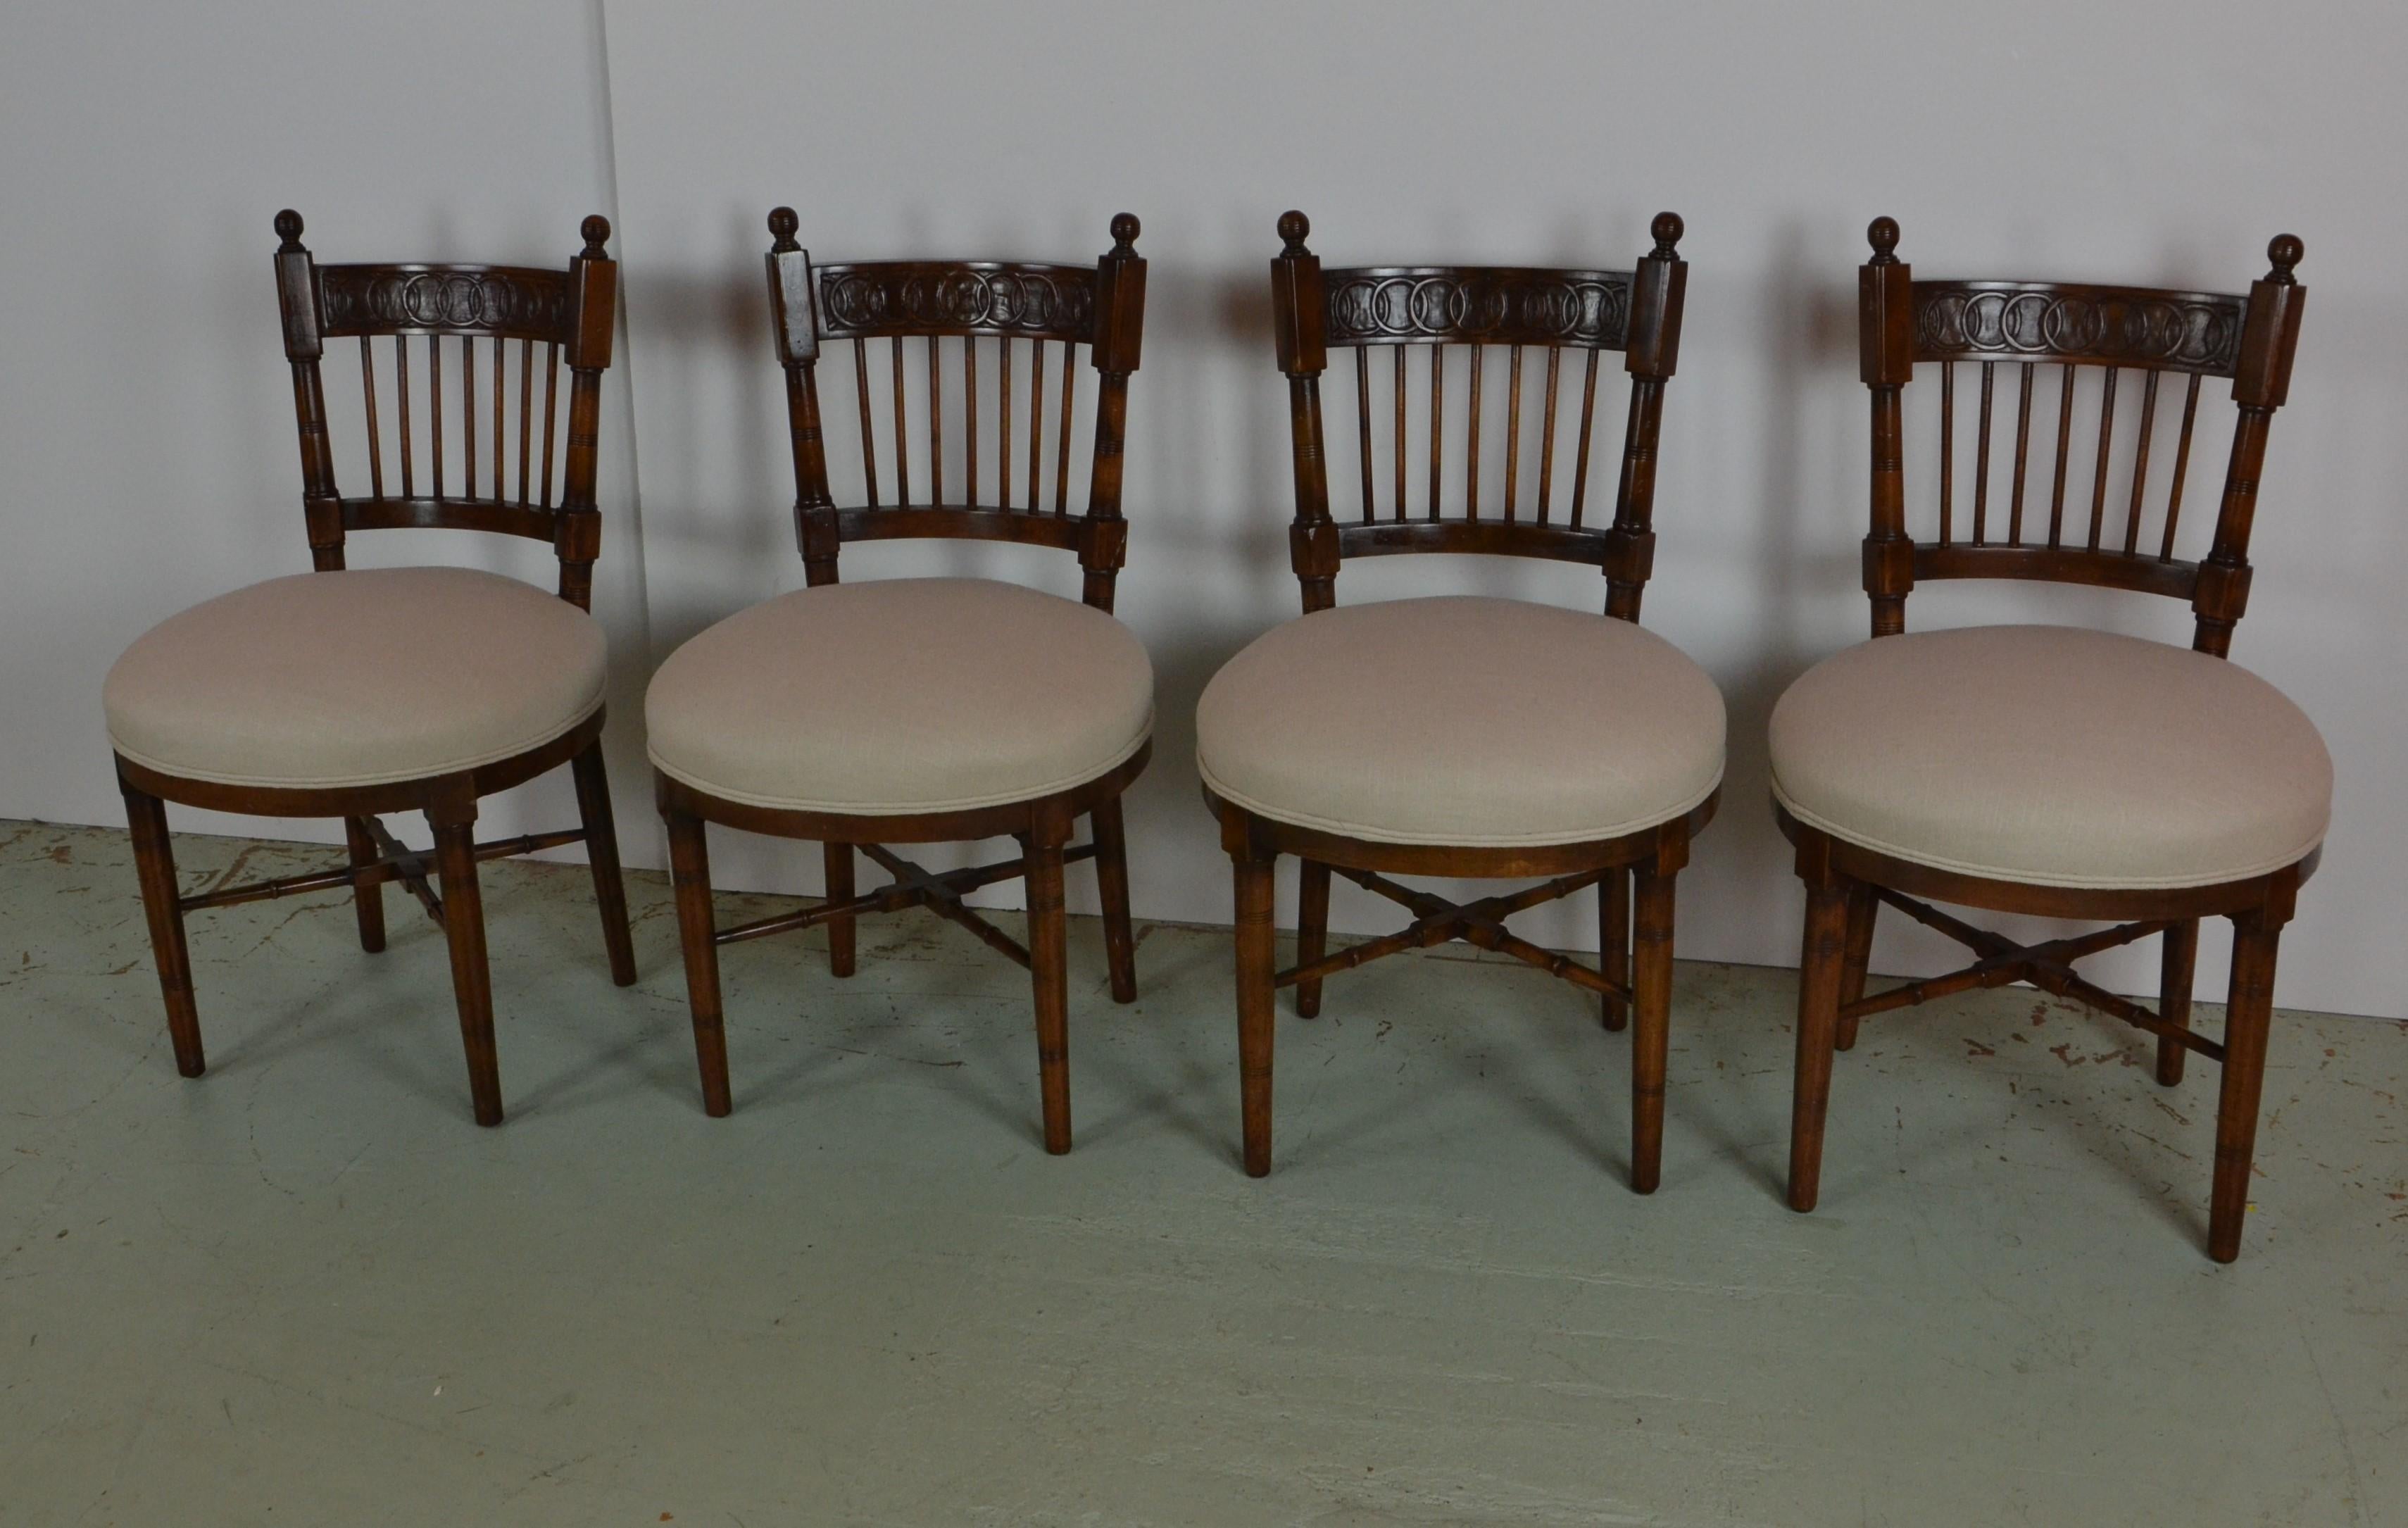 A set of 4 dining chairs with unusual styling. Possibly French Country. Back-splats decorated with a hand carved overlapping hoop design. Faux bamboo style stretchers. Mahogany stained beechwood. Newly upholstered in linen.